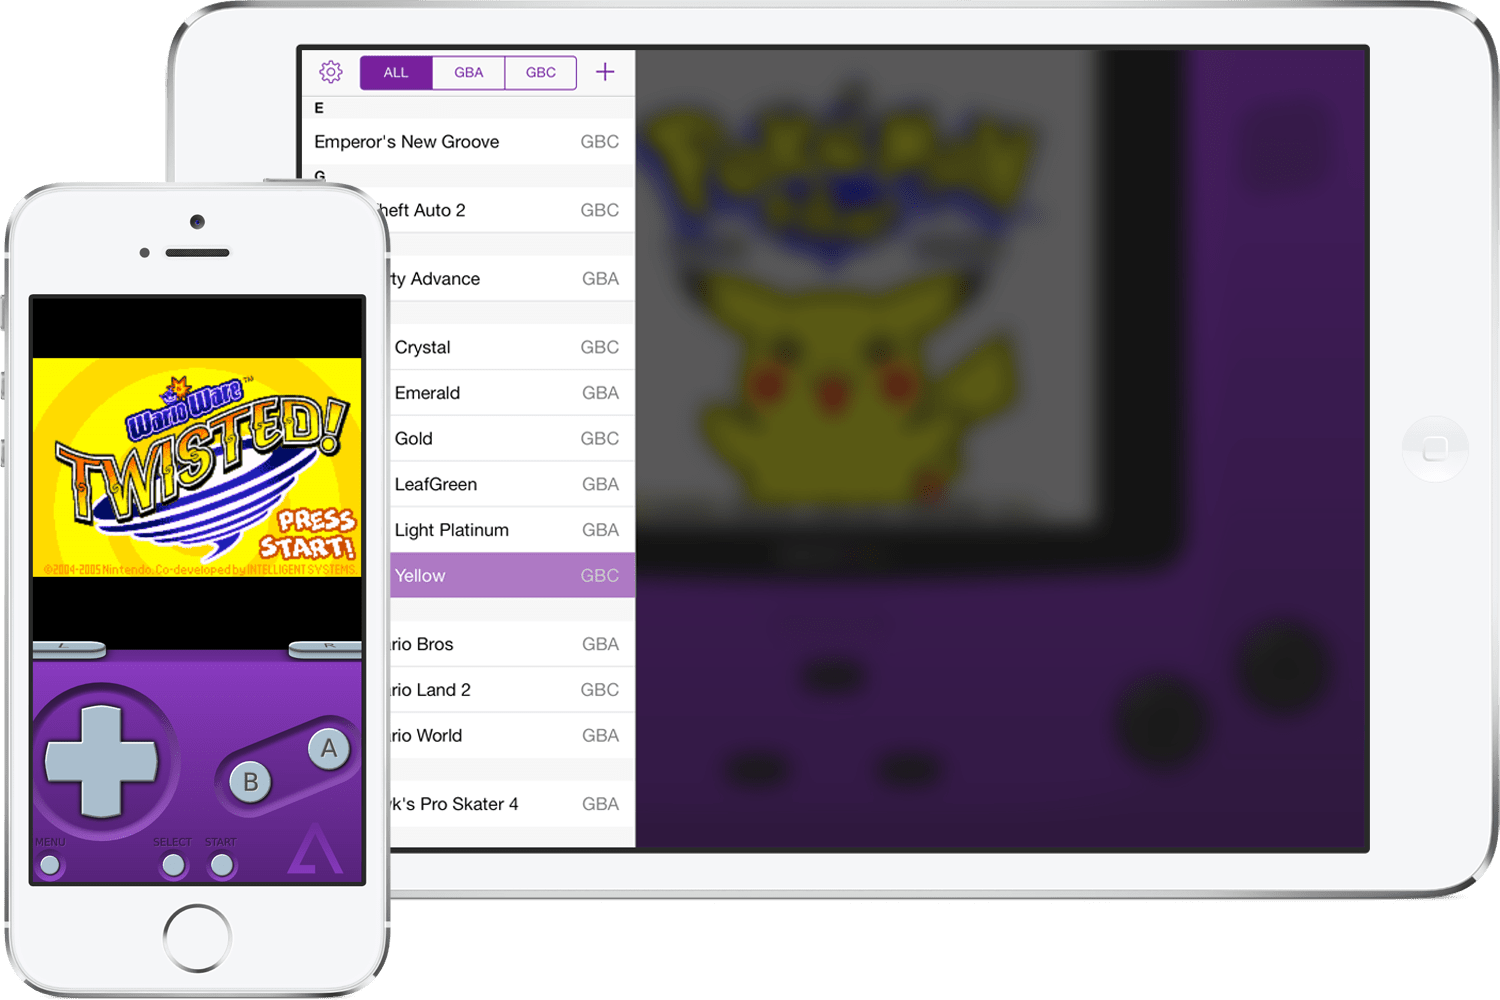 Are you an old gamer? Then you'll love this novelty from the same creator of GBA4iOS!